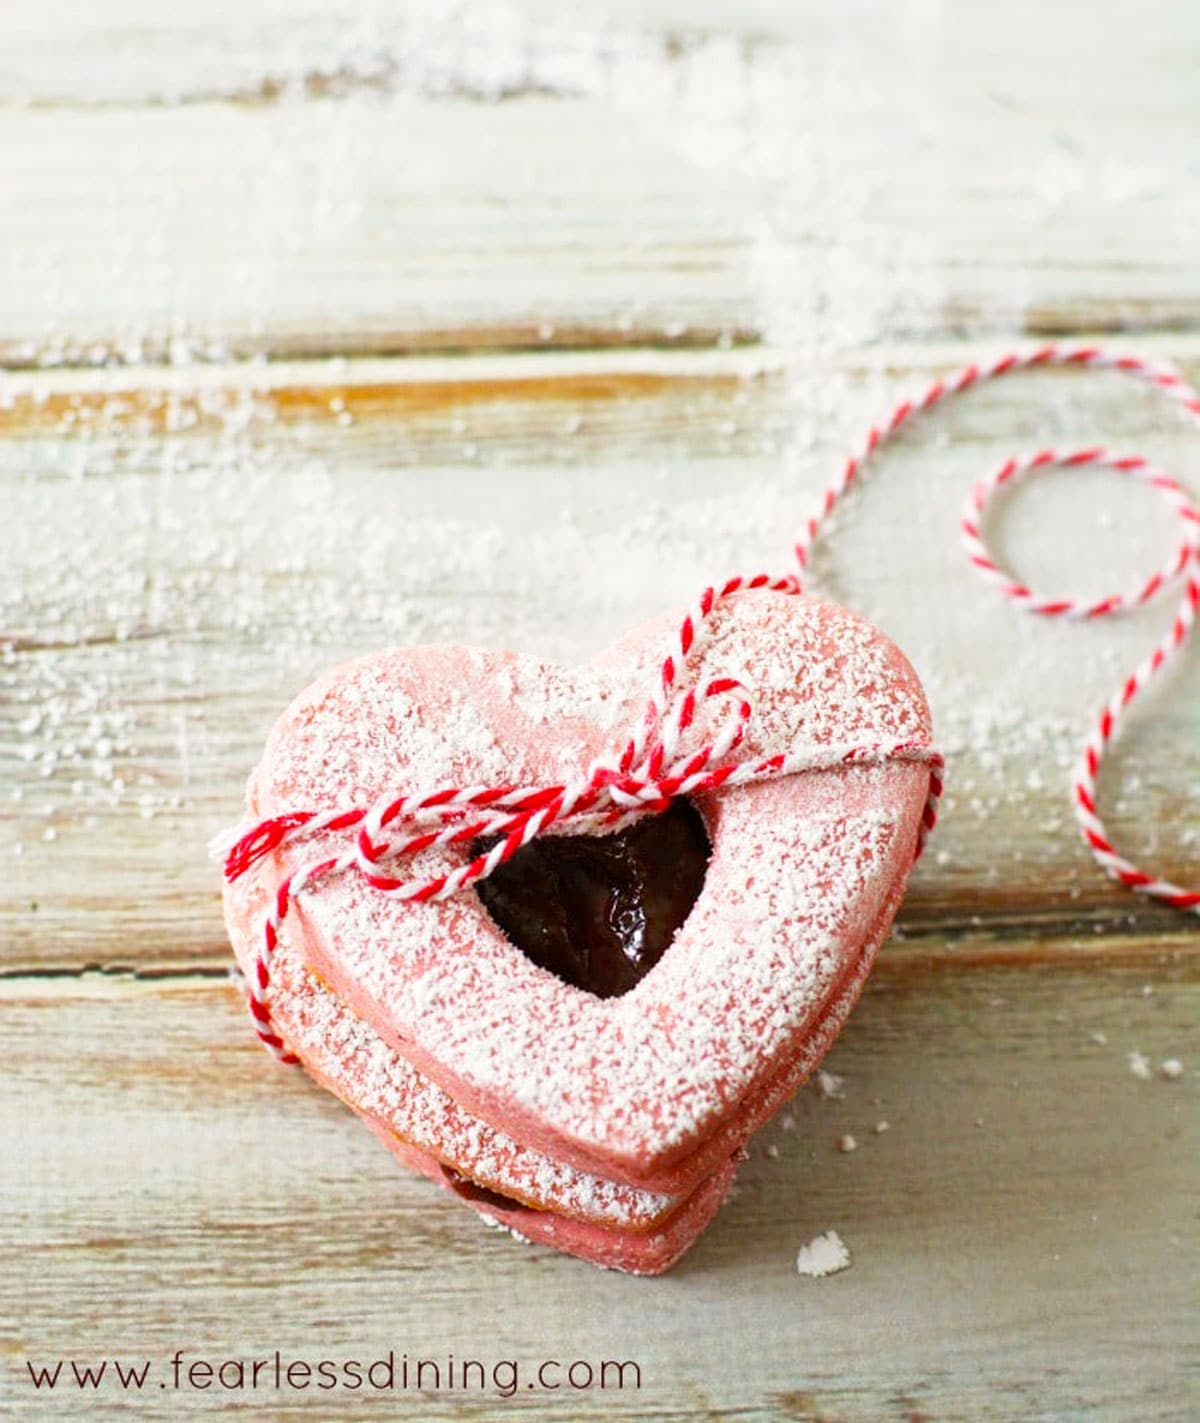 The heart shaped pink linzer cookies tied by a string.